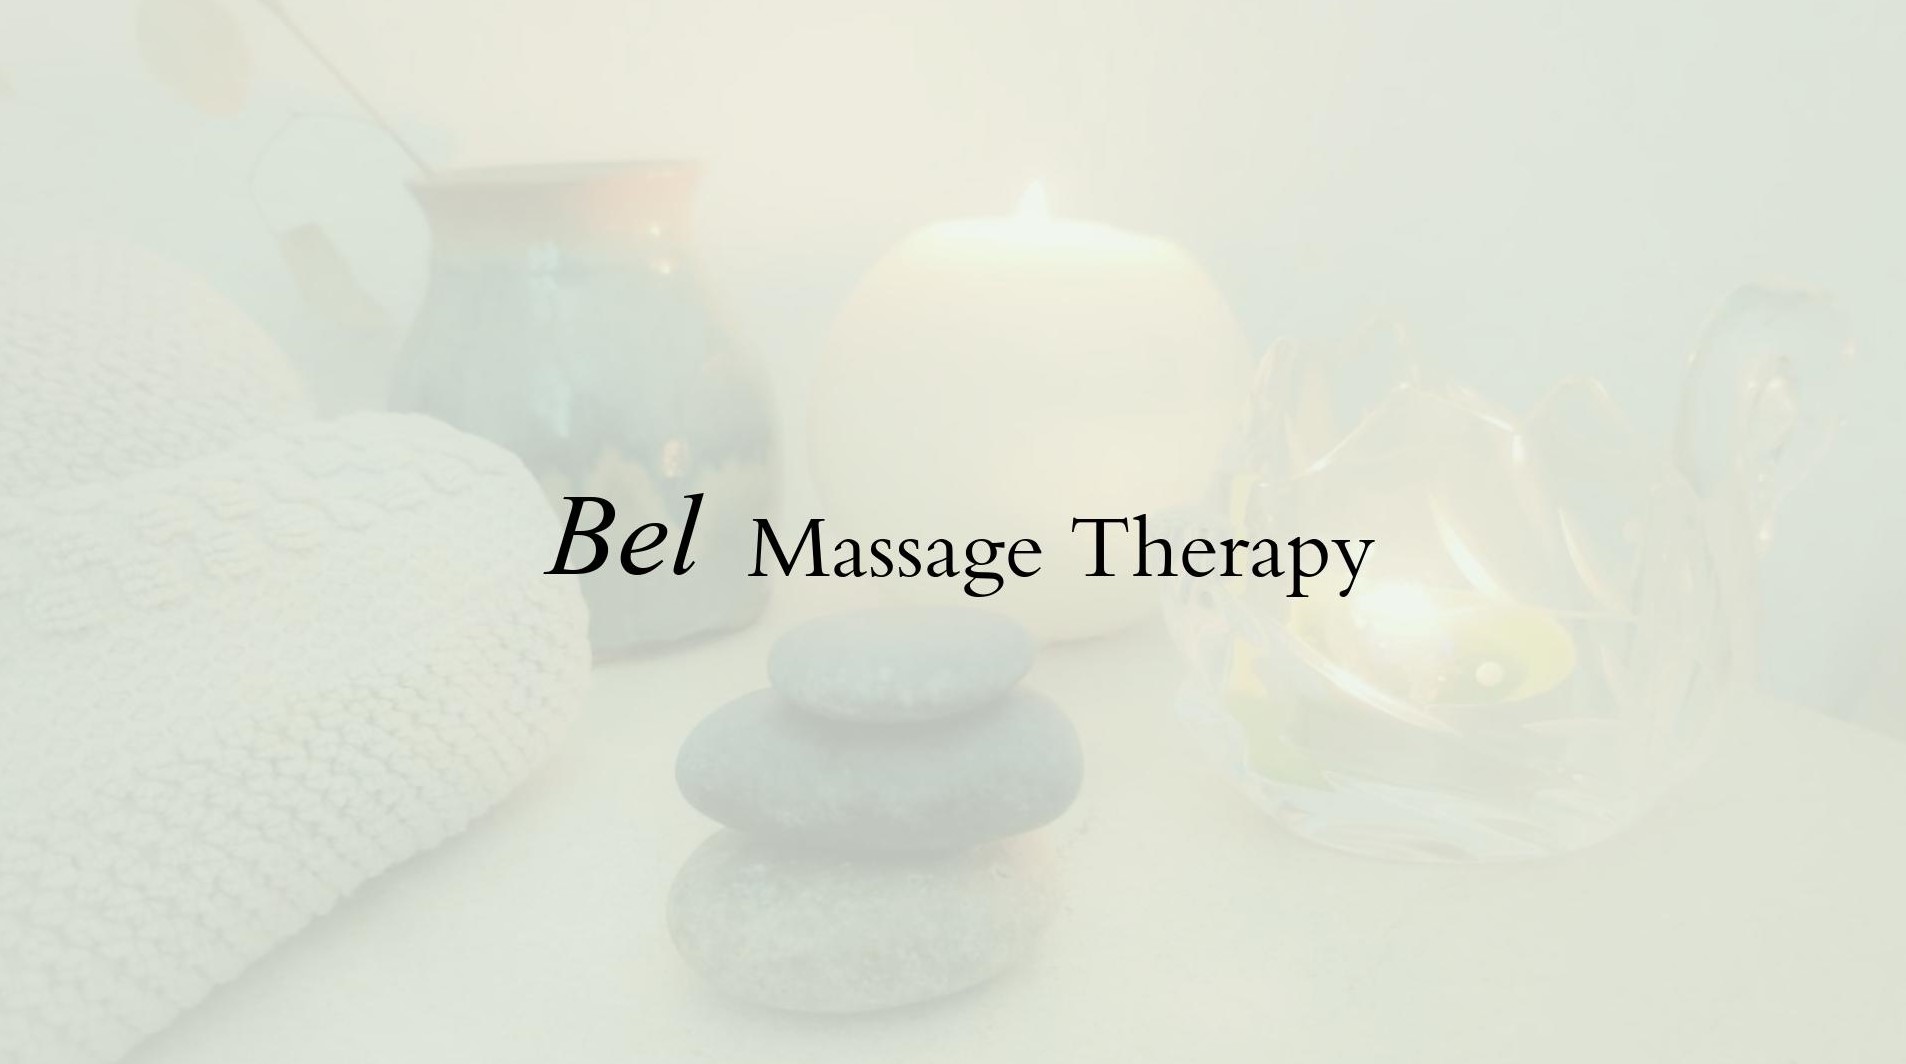 Bel Massage Therapy